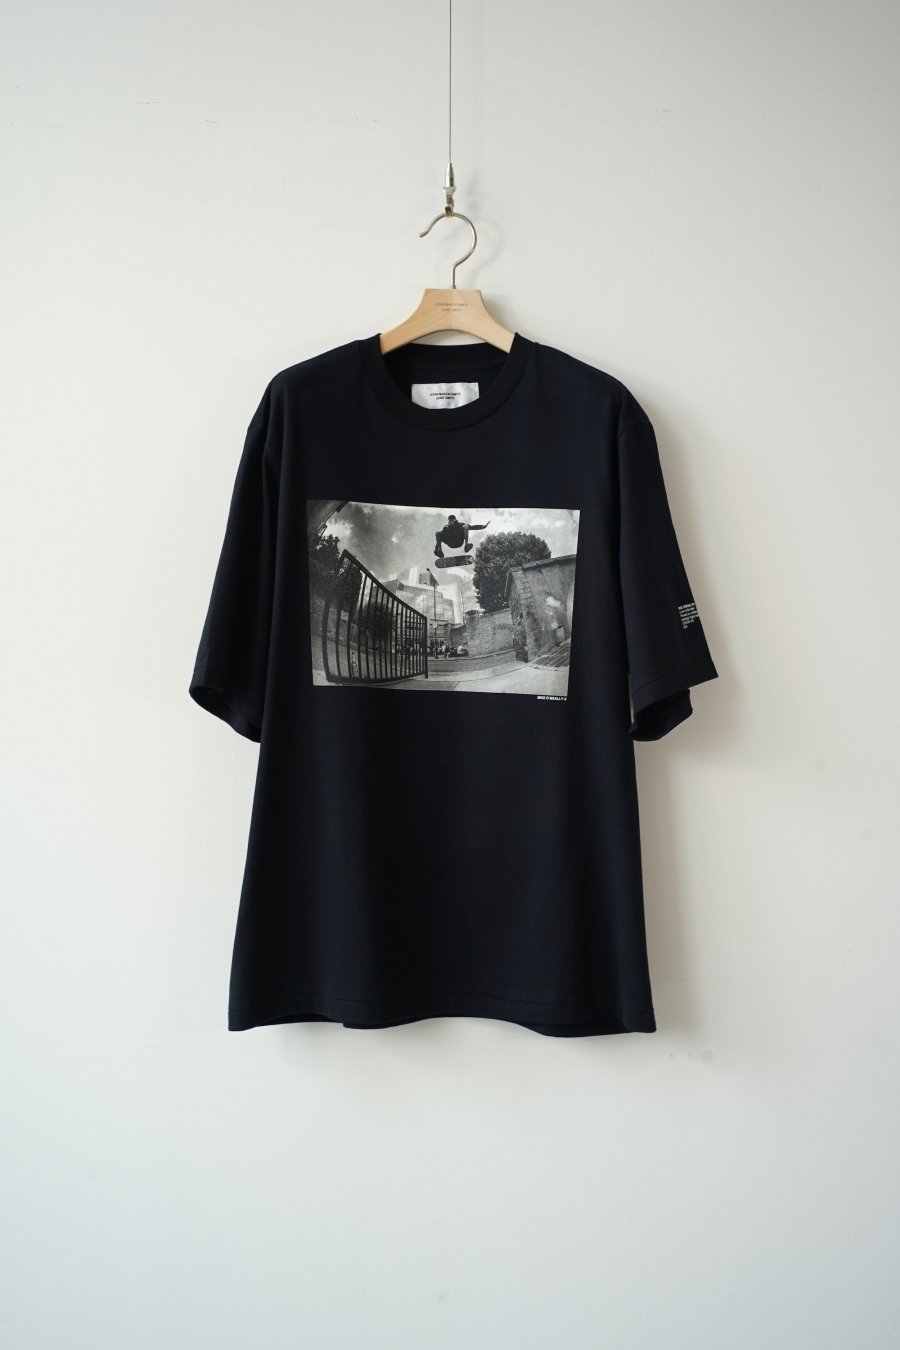 JOHN MASON SMITH × MIKE O’MEALLY  LUCIEN NOLLIE HEEL S/S T-SHIRT<img class='new_mark_img2' src='https://img.shop-pro.jp/img/new/icons15.gif' style='border:none;display:inline;margin:0px;padding:0px;width:auto;' />